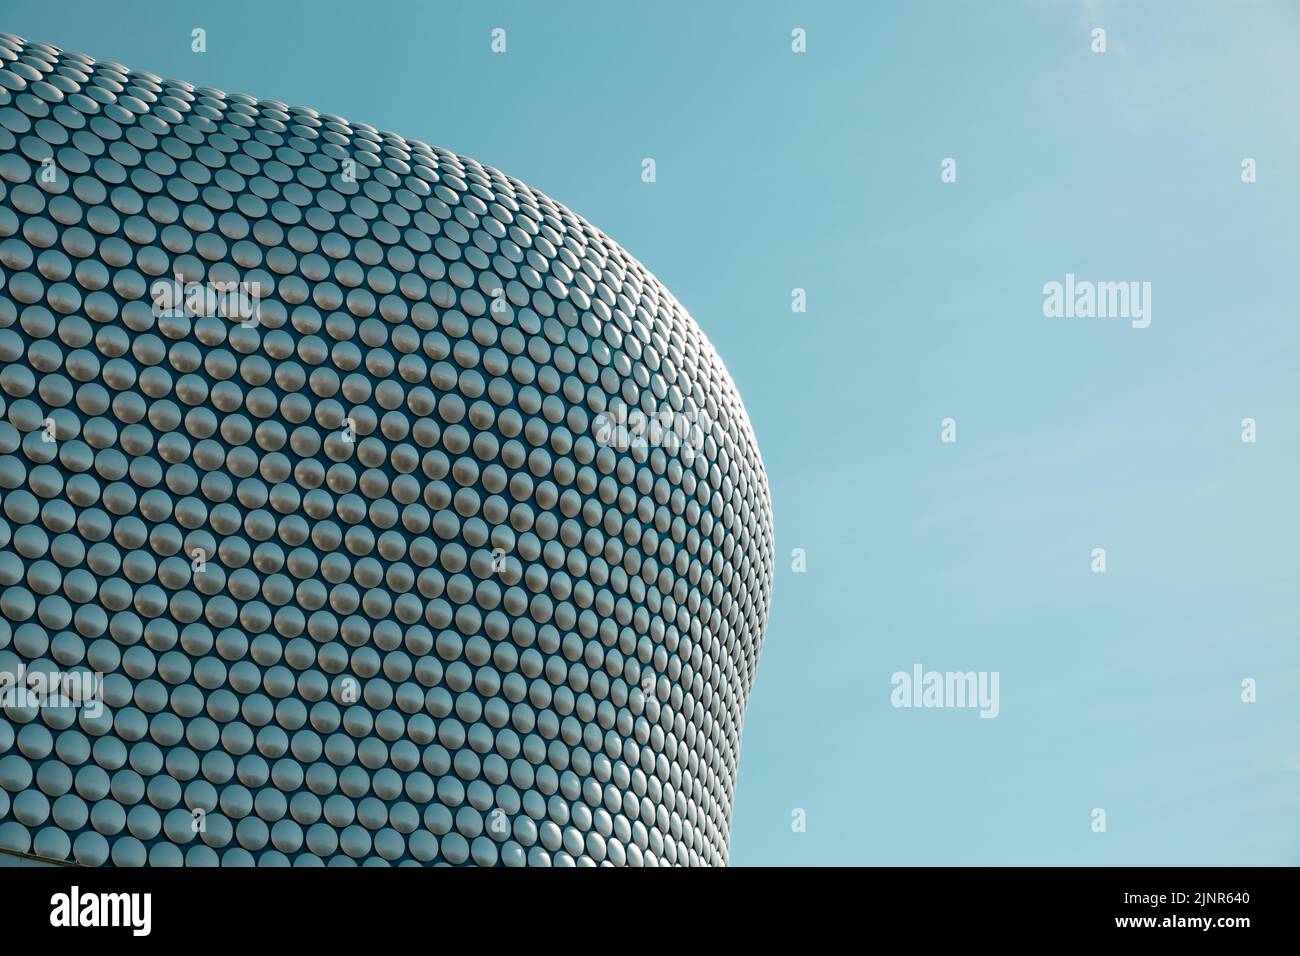 The curves and aluminium discs of the Selfridges building at The Bullring shopping centre in Birmingham, UK Stock Photo